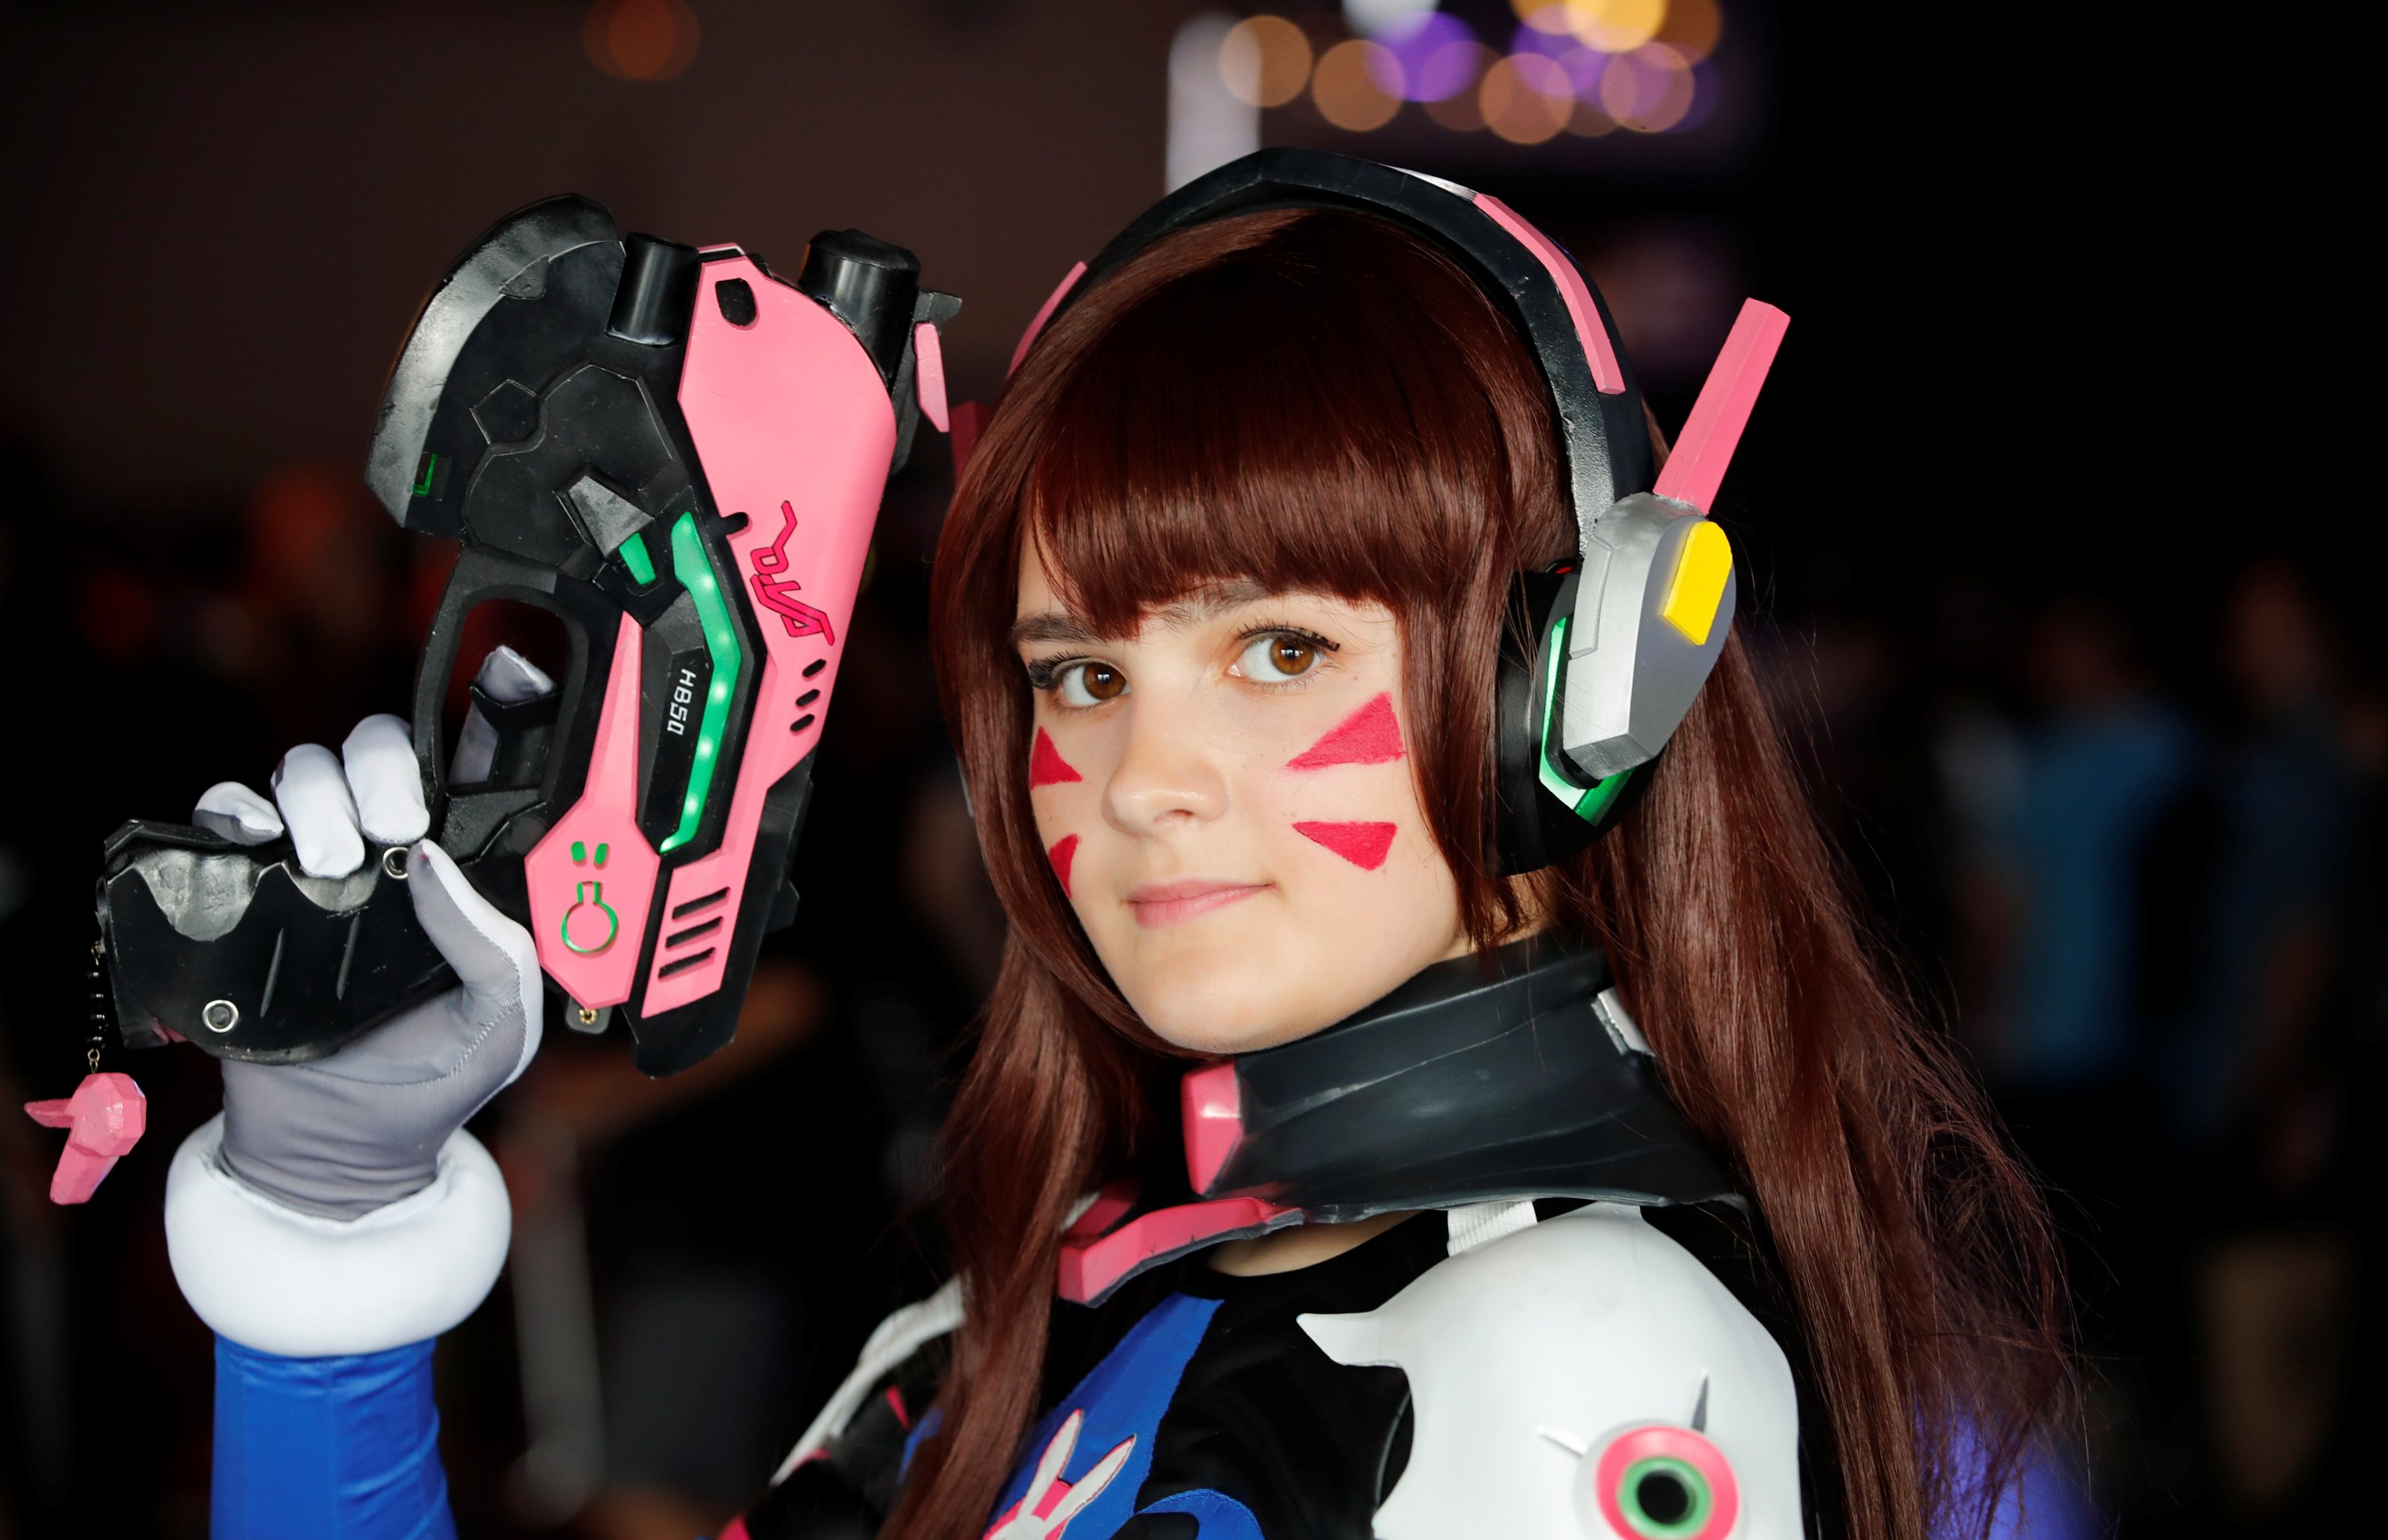 A cosplayer dressed as D.va, a tank hero in the first-person shooter video game Overwatch, poses during the world's largest computer games fair, Gamescom, in Cologne, Germany August 23, 2017. (REUTERS Photo)